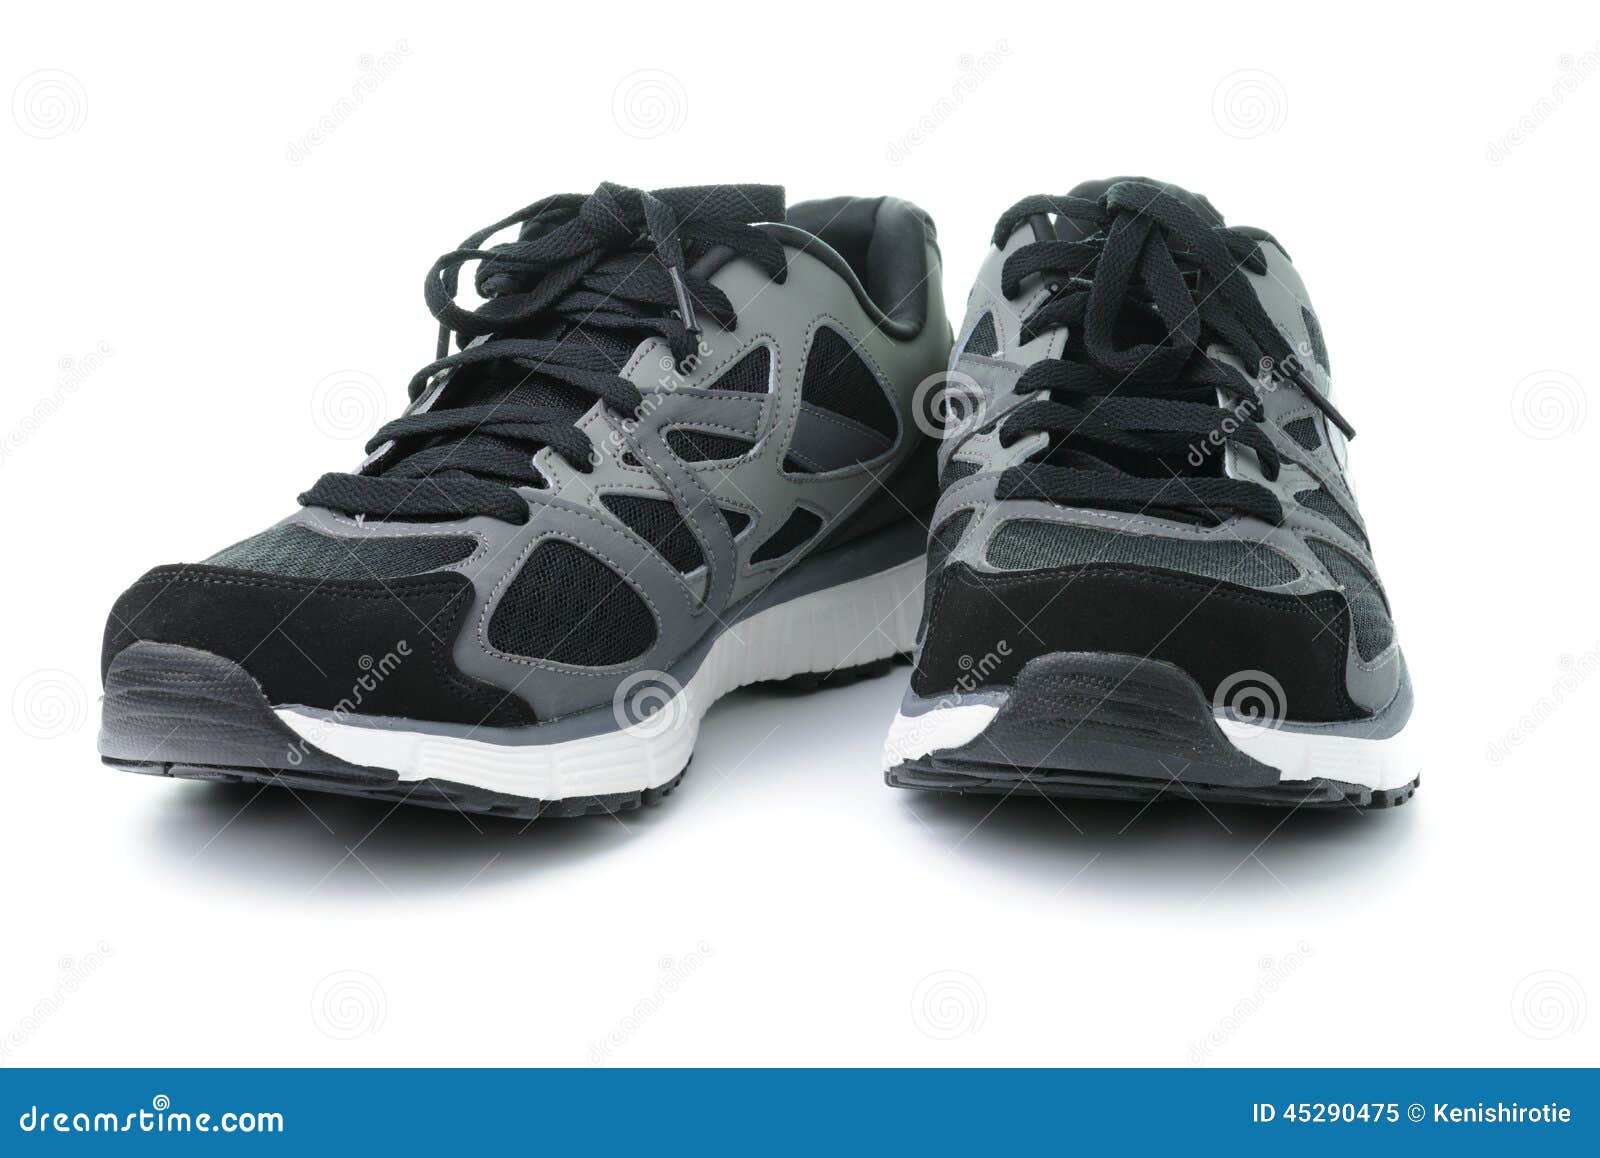 Men sport shoes stock image. Image of sneakers, black - 45290475